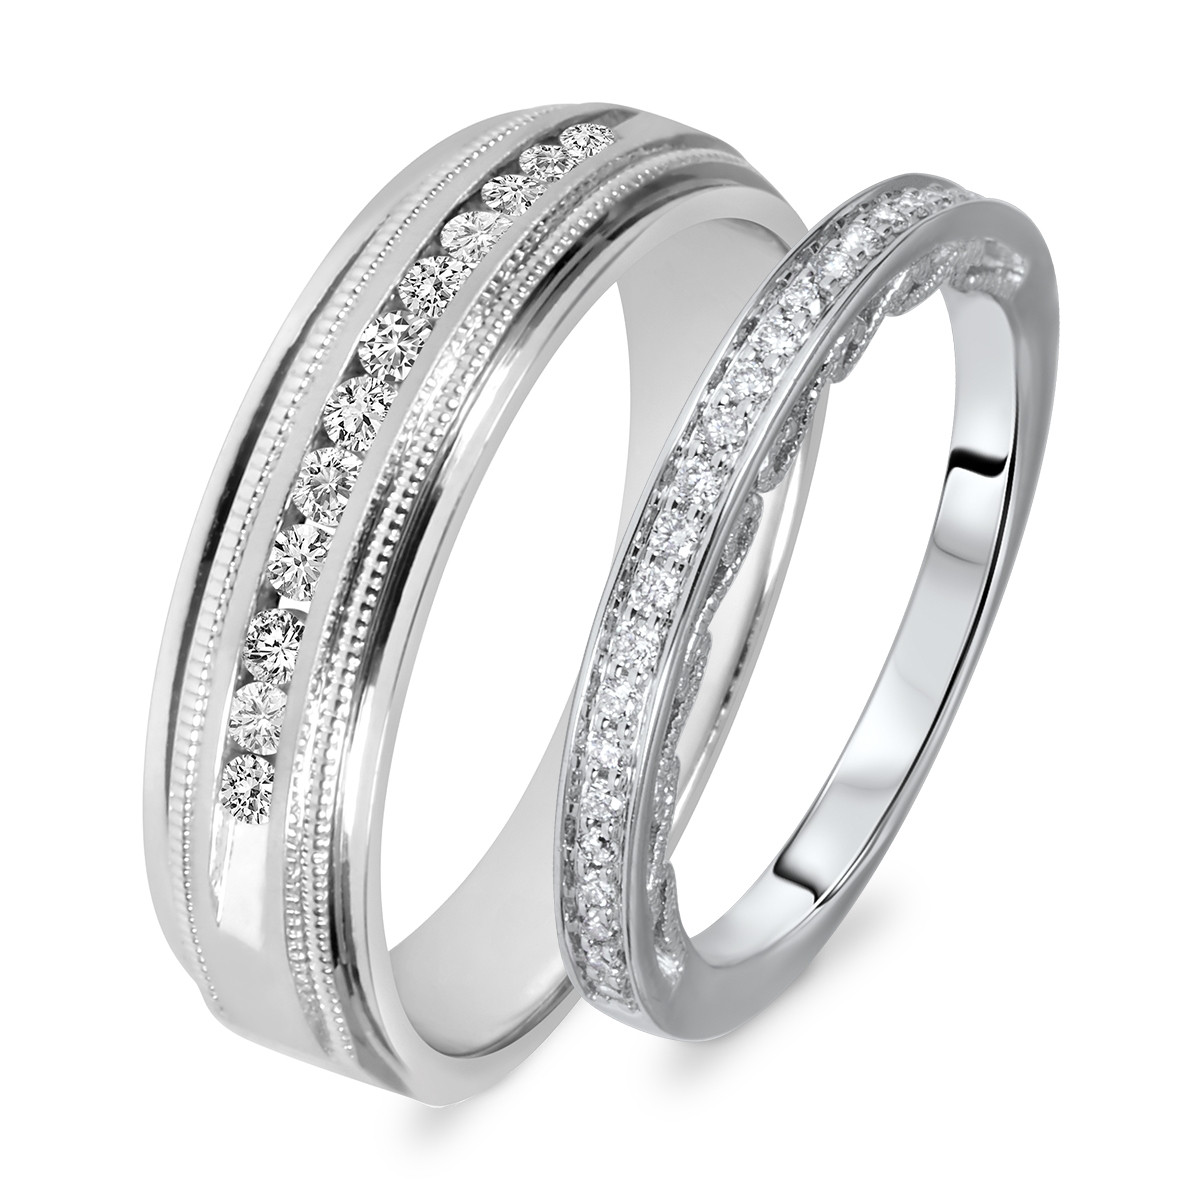 His Hers Wedding Bands
 Gallery his & hers wedding bands sets Matvuk